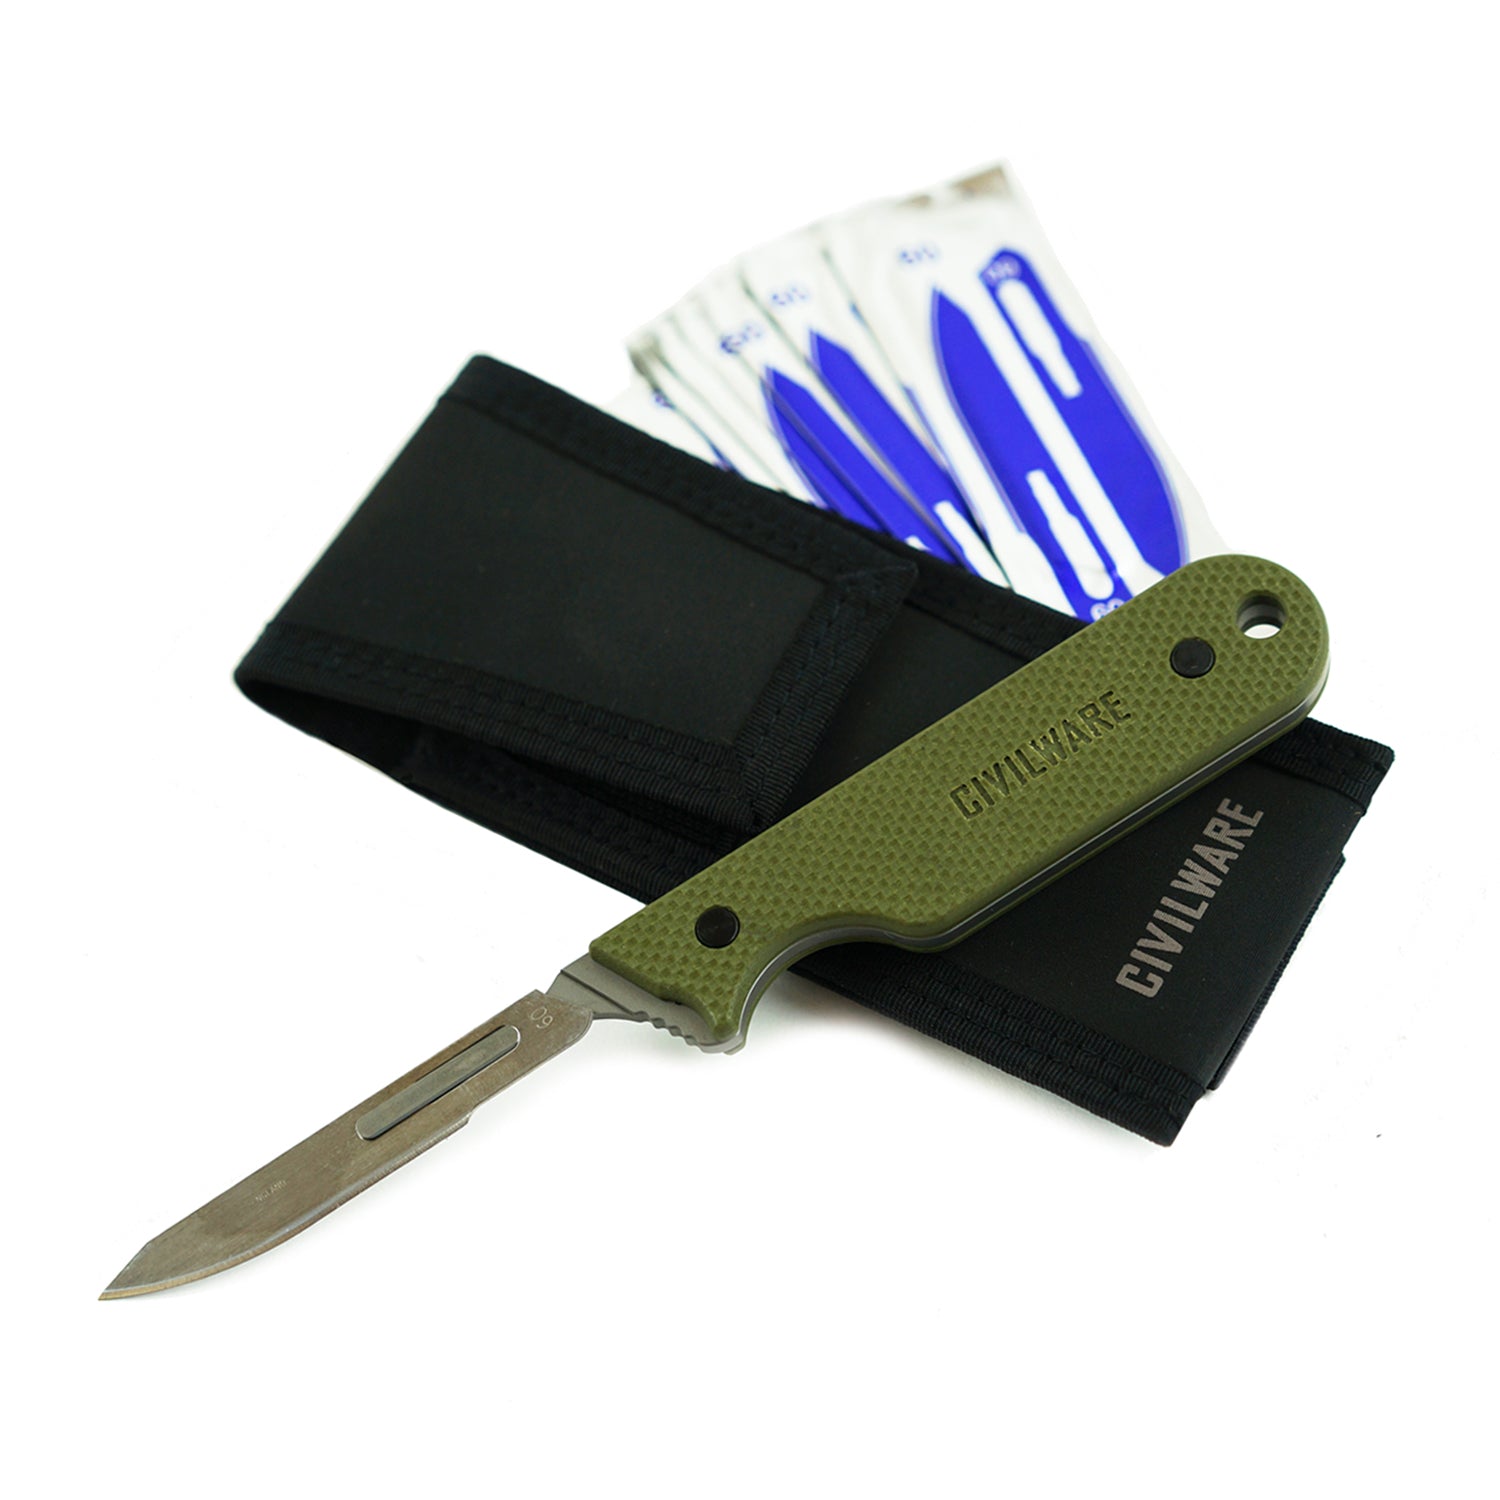 Civilware's Interchangeable Blade Knife in OD Green. Ultralight titanium skinning knife with removable and replaceable surgical blades for easy, precision skinning of big and small game animals, alike. 